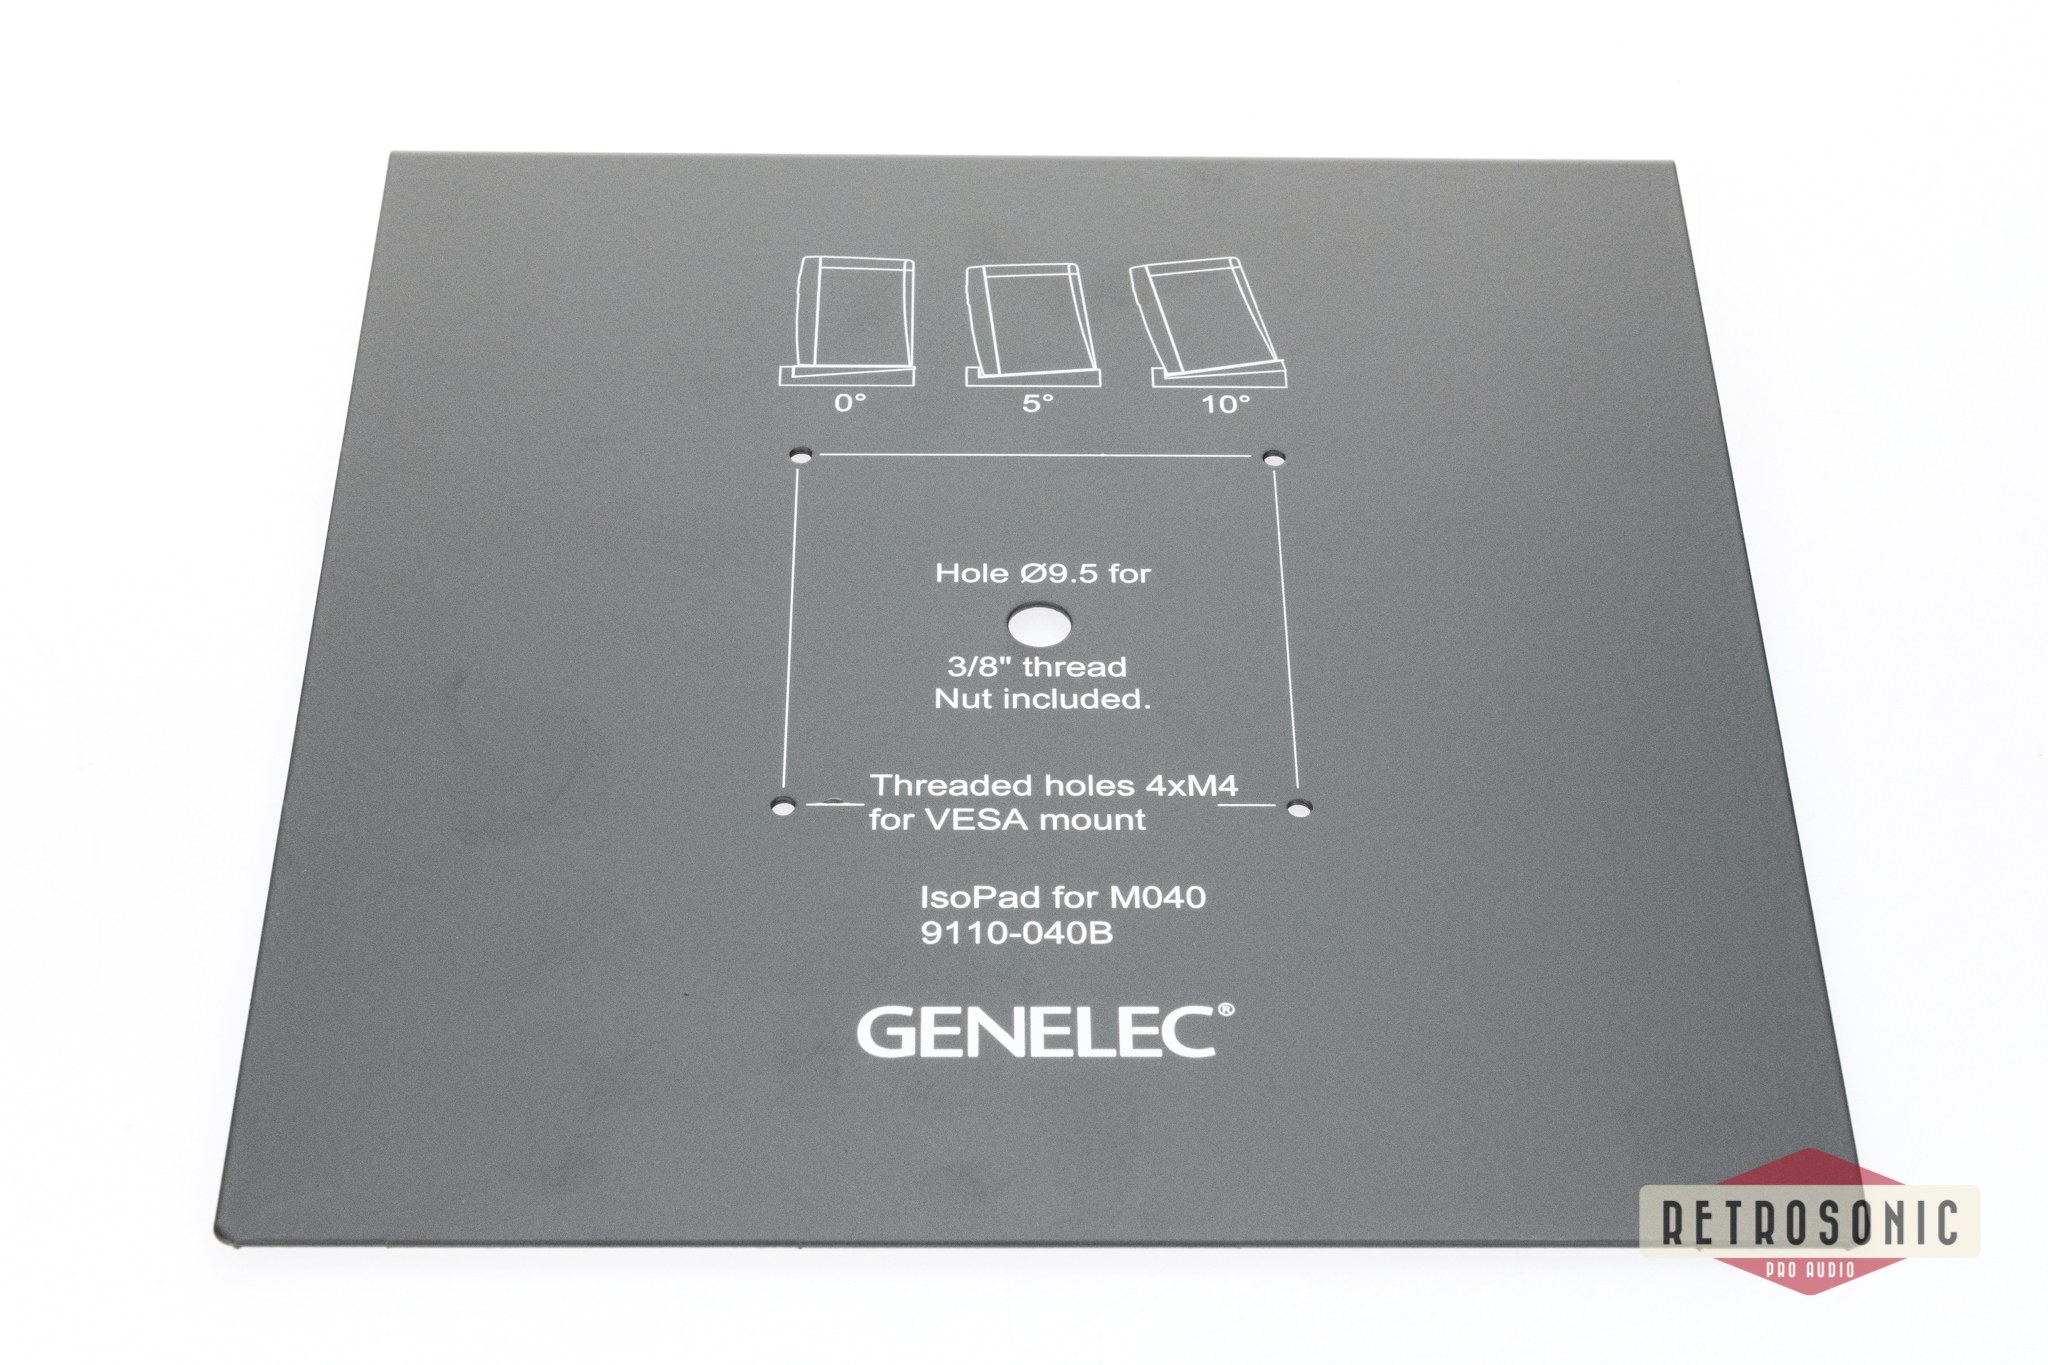 Genelec IsoPad for M040 with 0-5-10 degrees tilting